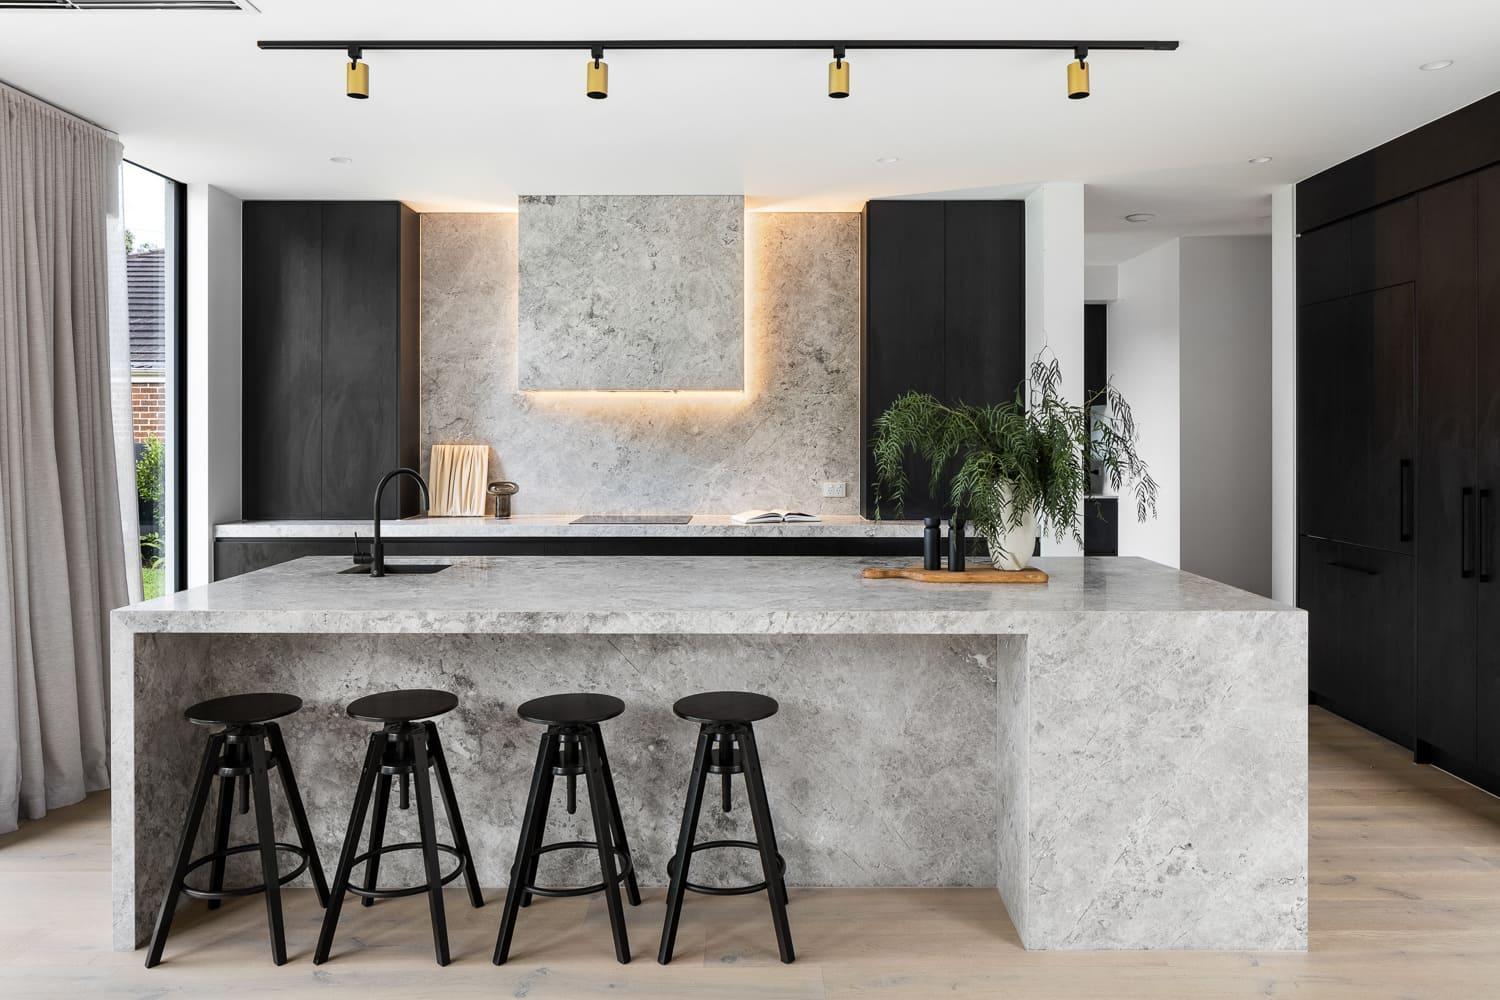 A contemporary kitchen with natural stone island bench and splash back and stylish black stools.